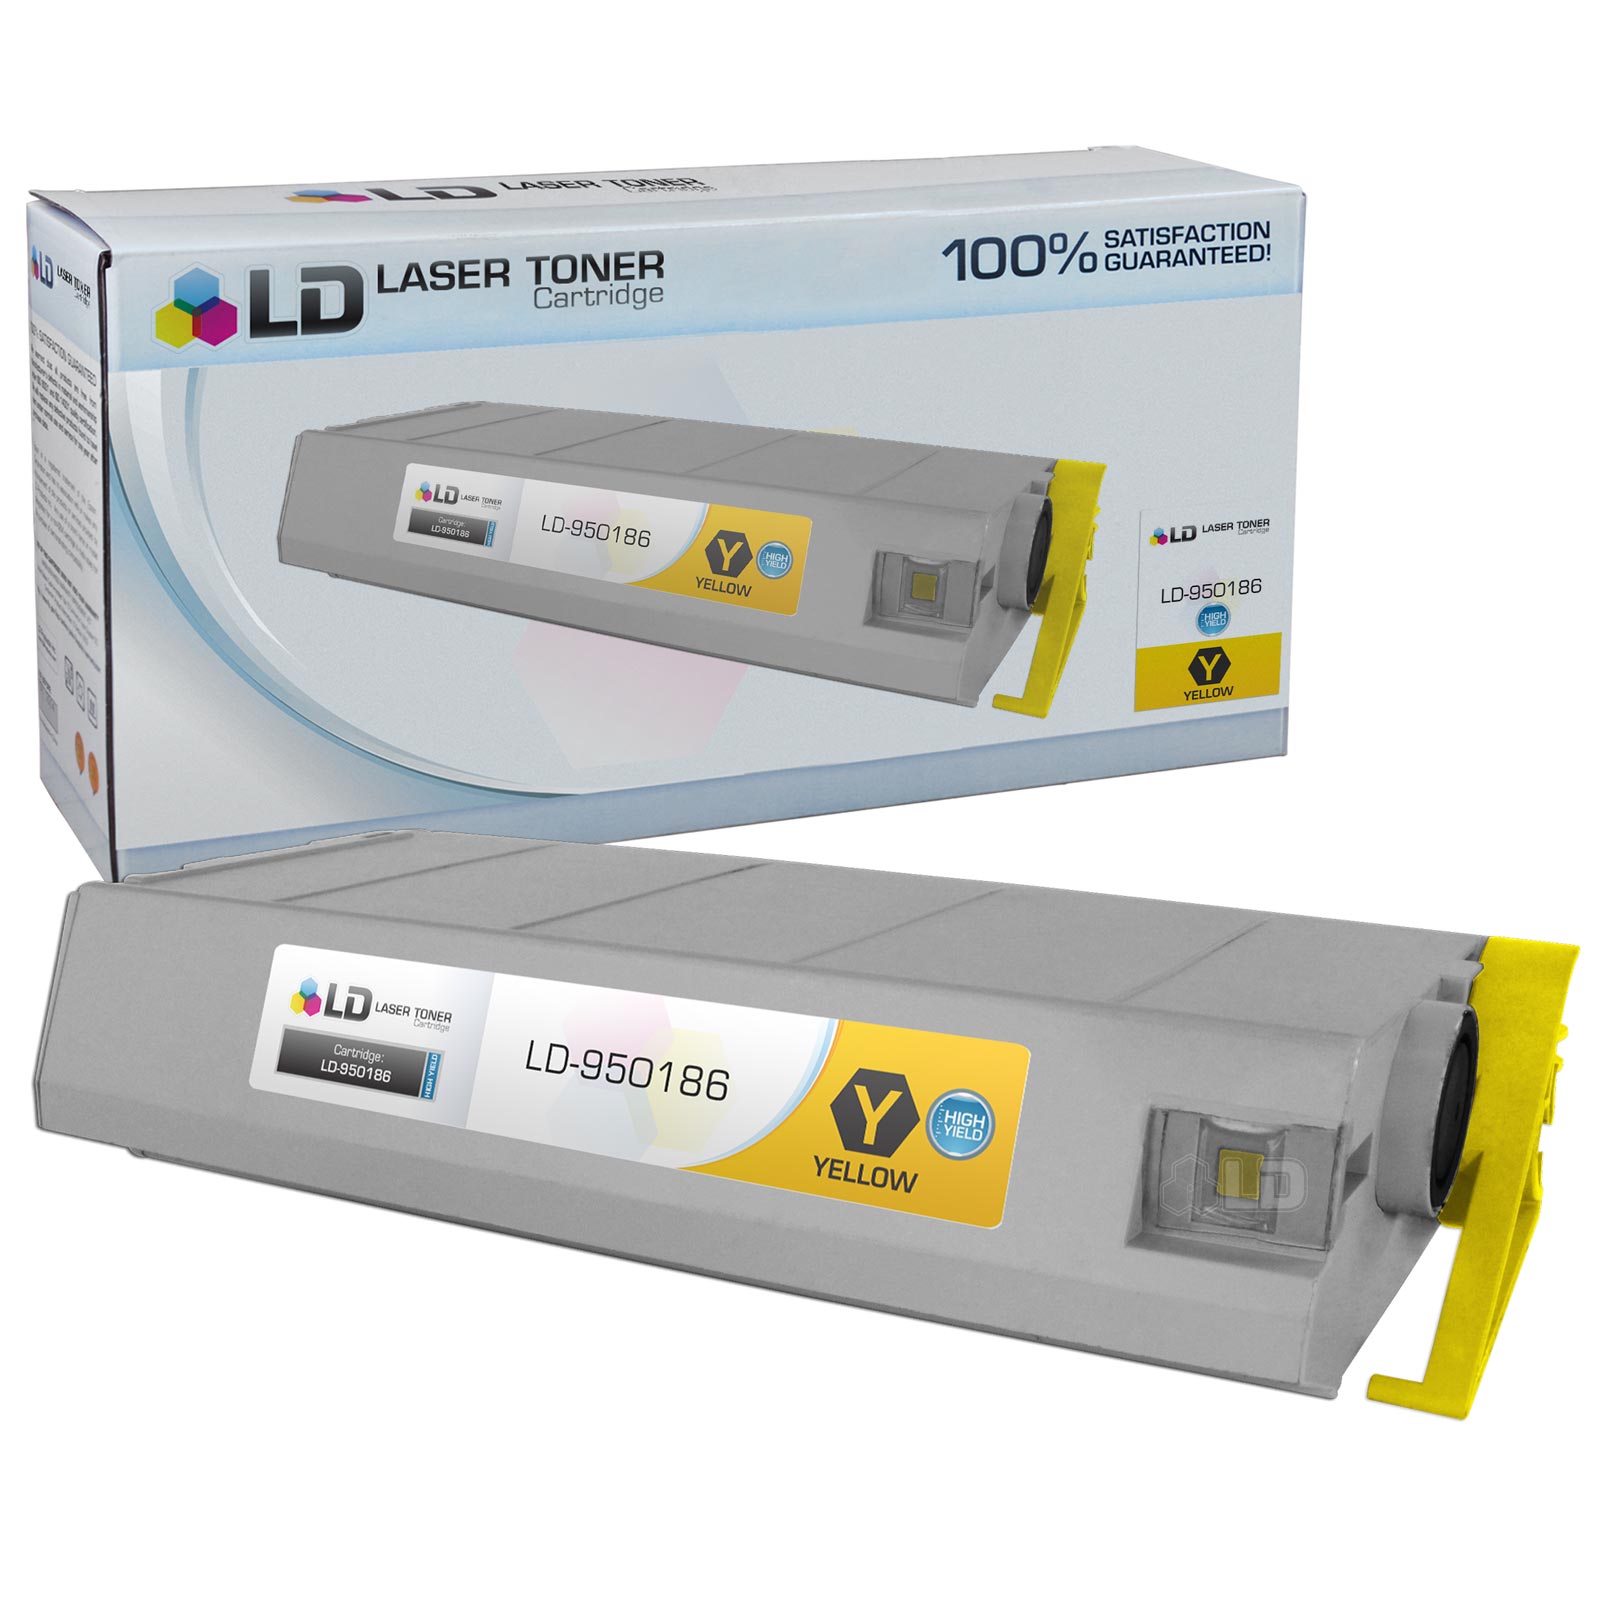 LD Remanufactured Toner Cartridge Replacement for Konica Minolta 950-186 High Yield (Yellow) - image 1 of 1